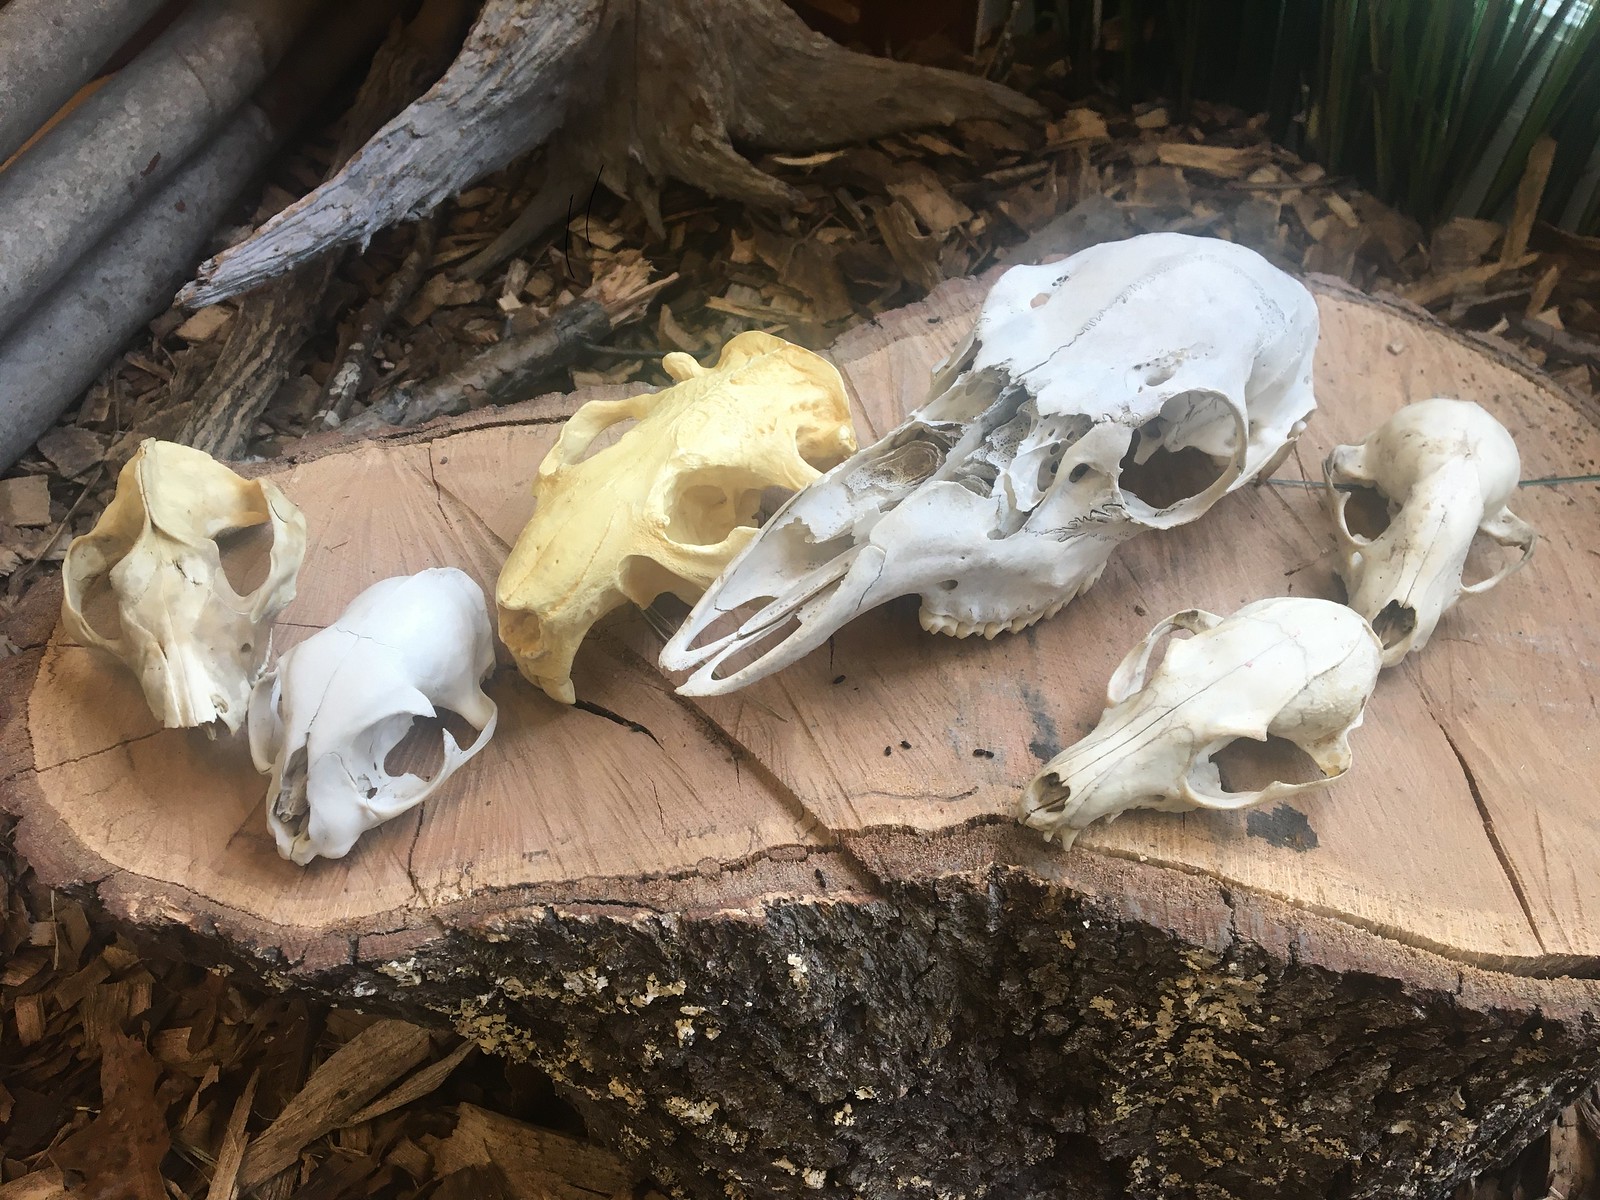 What Lies Beneath - Skull Identification Part II - State Parks Blogs